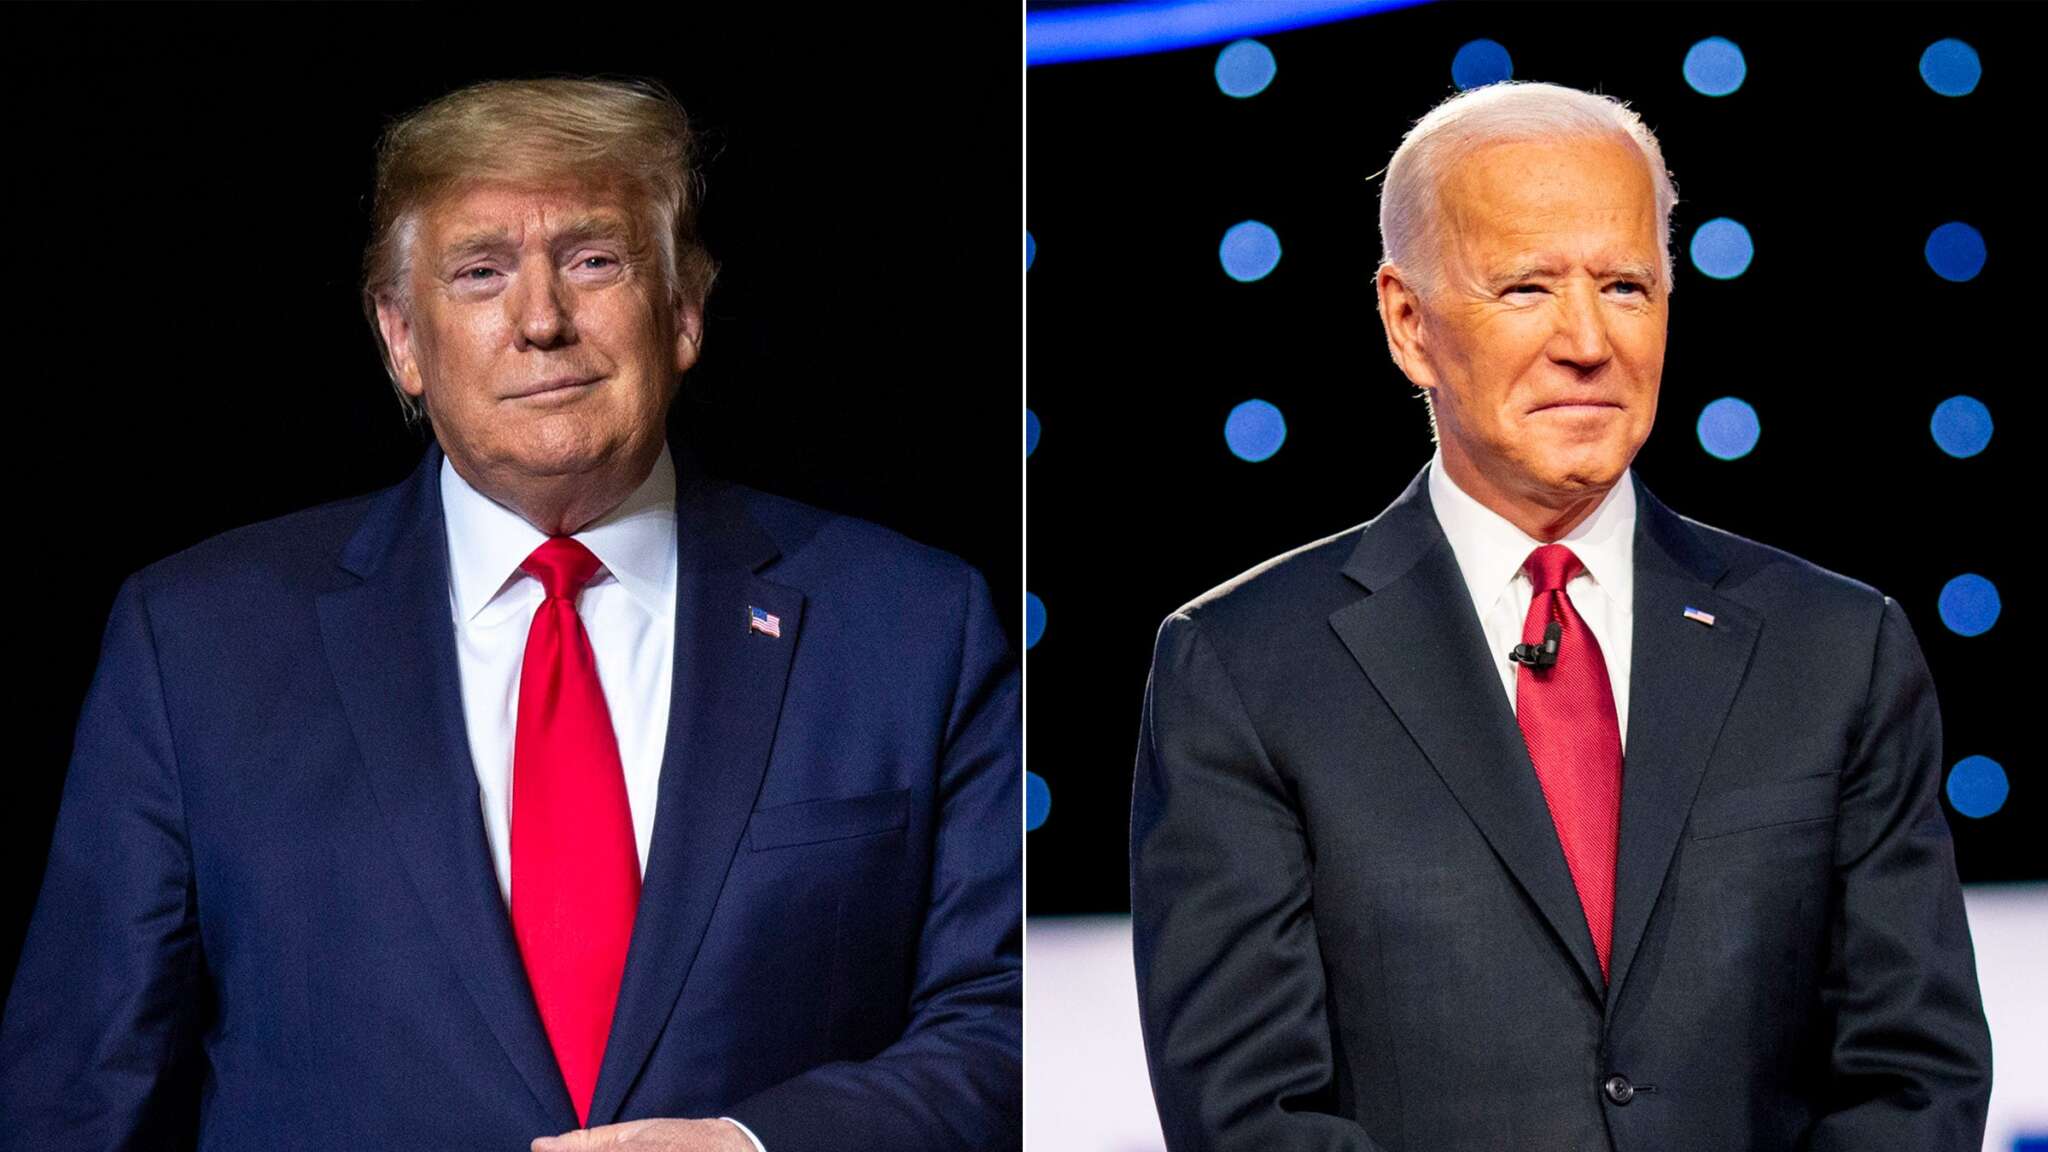 Donald Trump Says He Won’t Be At Joe Biden’s Inauguration And The President-Elect Claps Back – That’s ‘A Good Thing!’